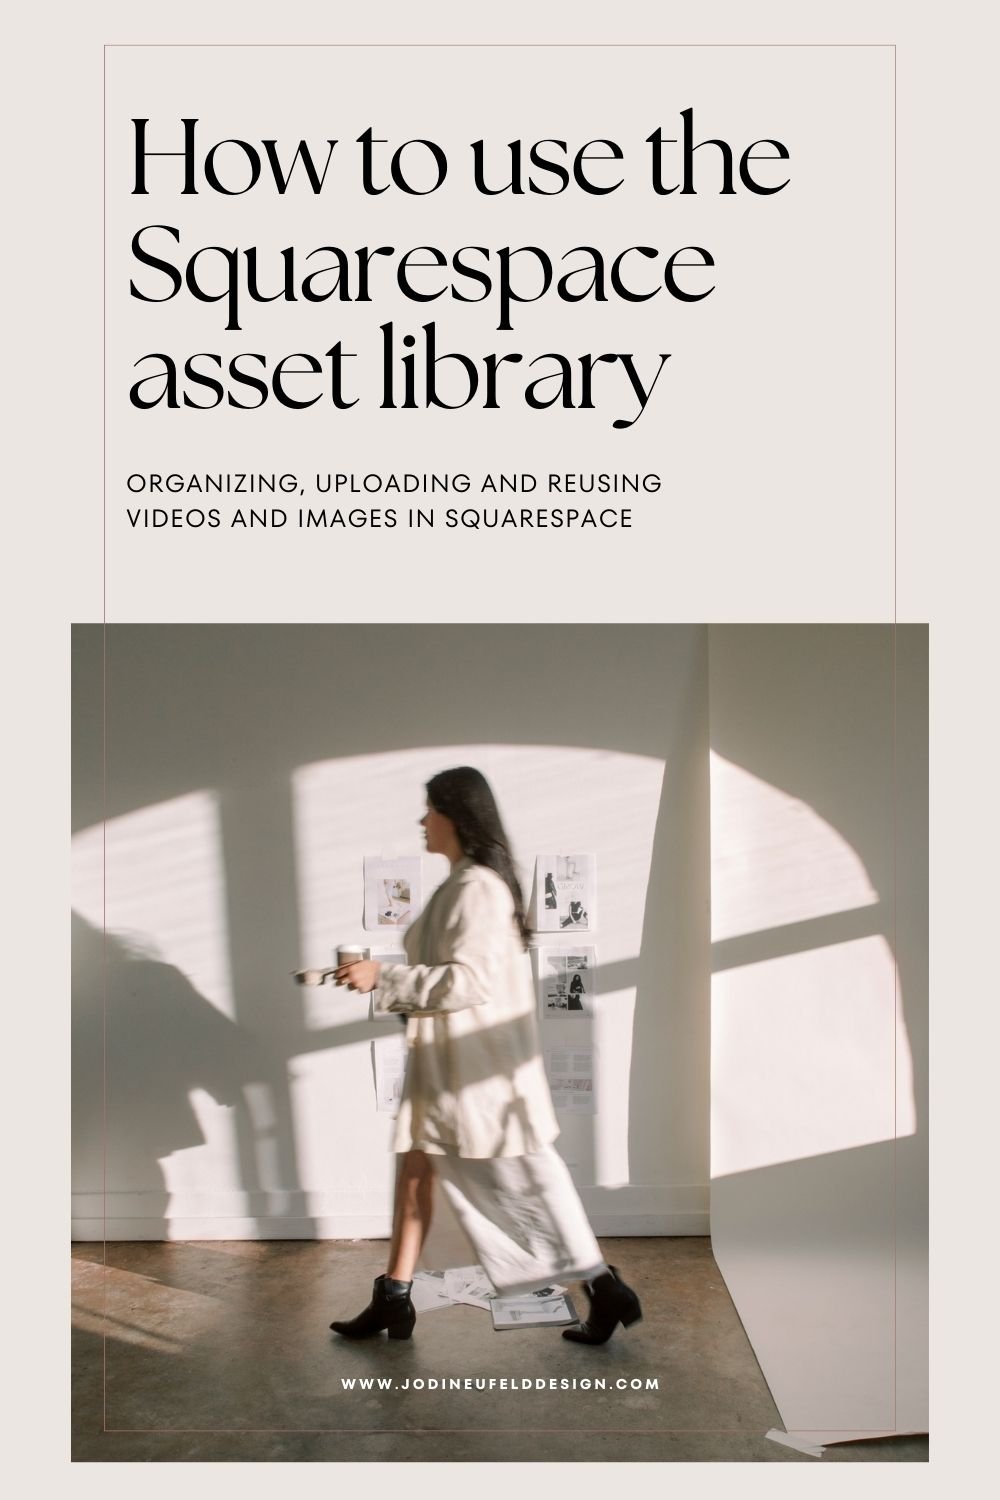 How to use the image asset library in Squarespace | Jodi Neufeld Design Squarespace web designer